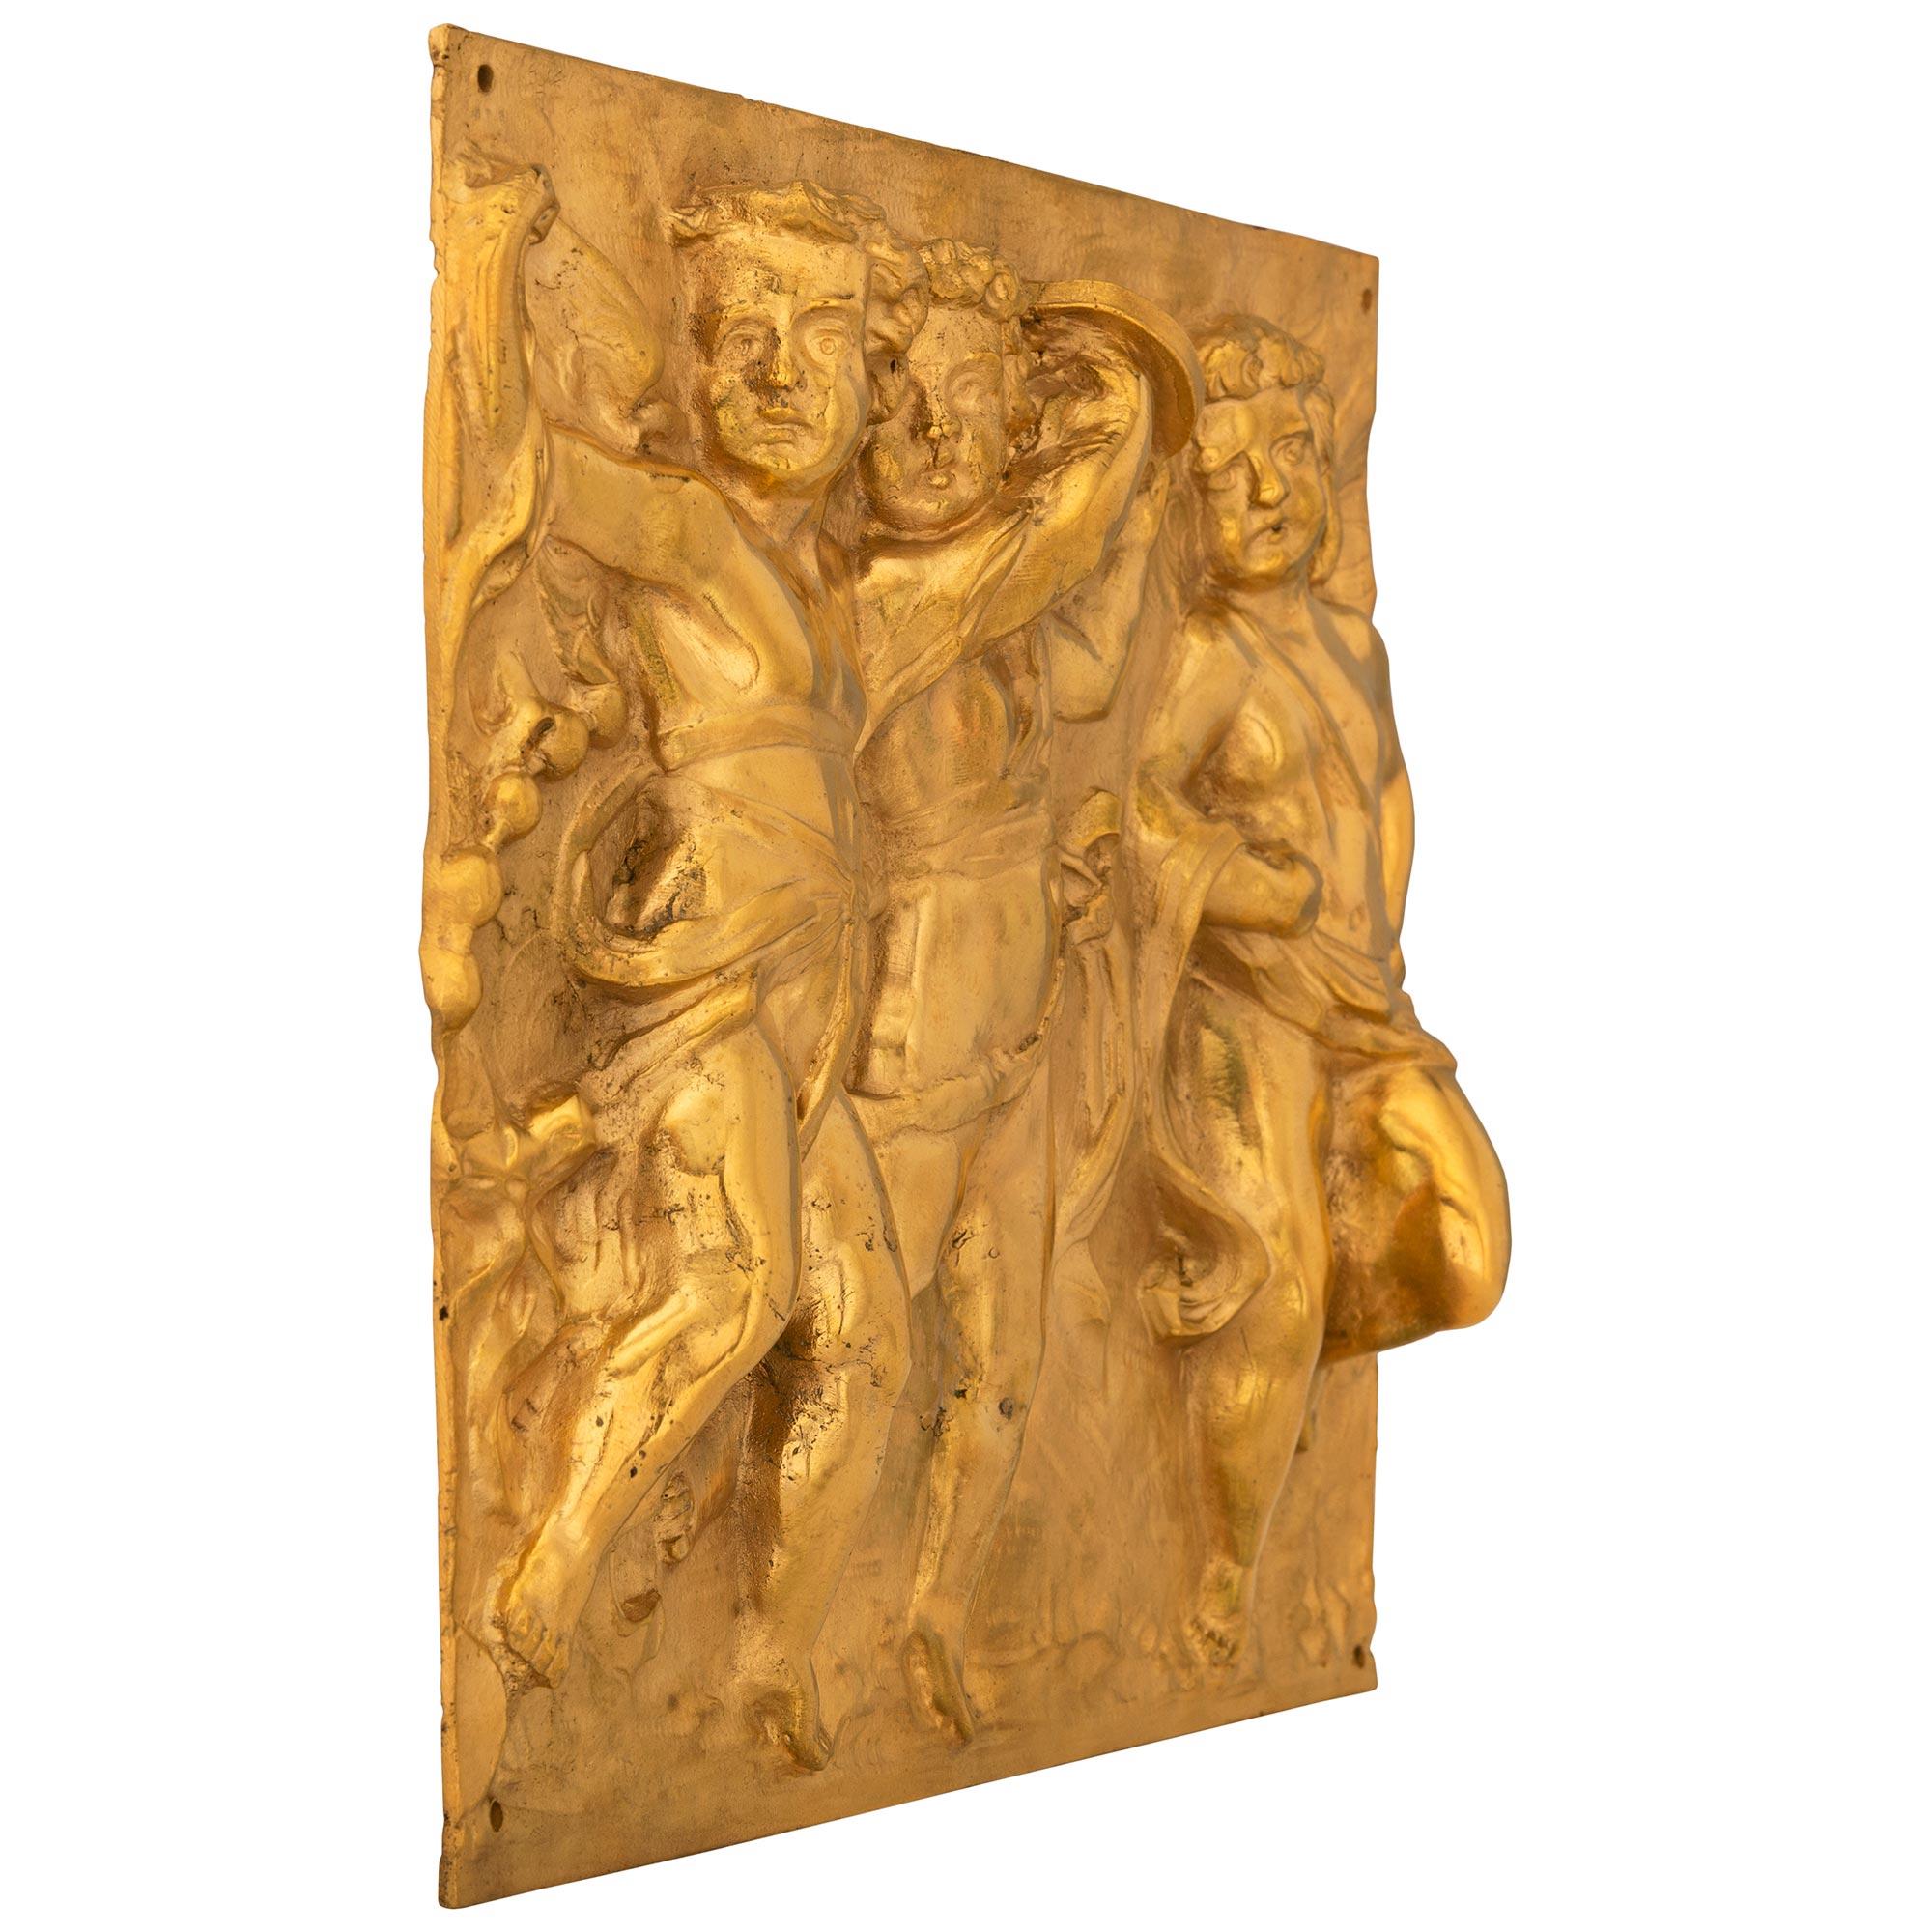 An exceptional pair of French 19th century Louis XVI st. ormolu decorative wall plaques in the manner of Clodion. Each rectangular plaque depicts charming winged cherubs draped in wonderful flowing ribbons and garments joyously dancing and playing